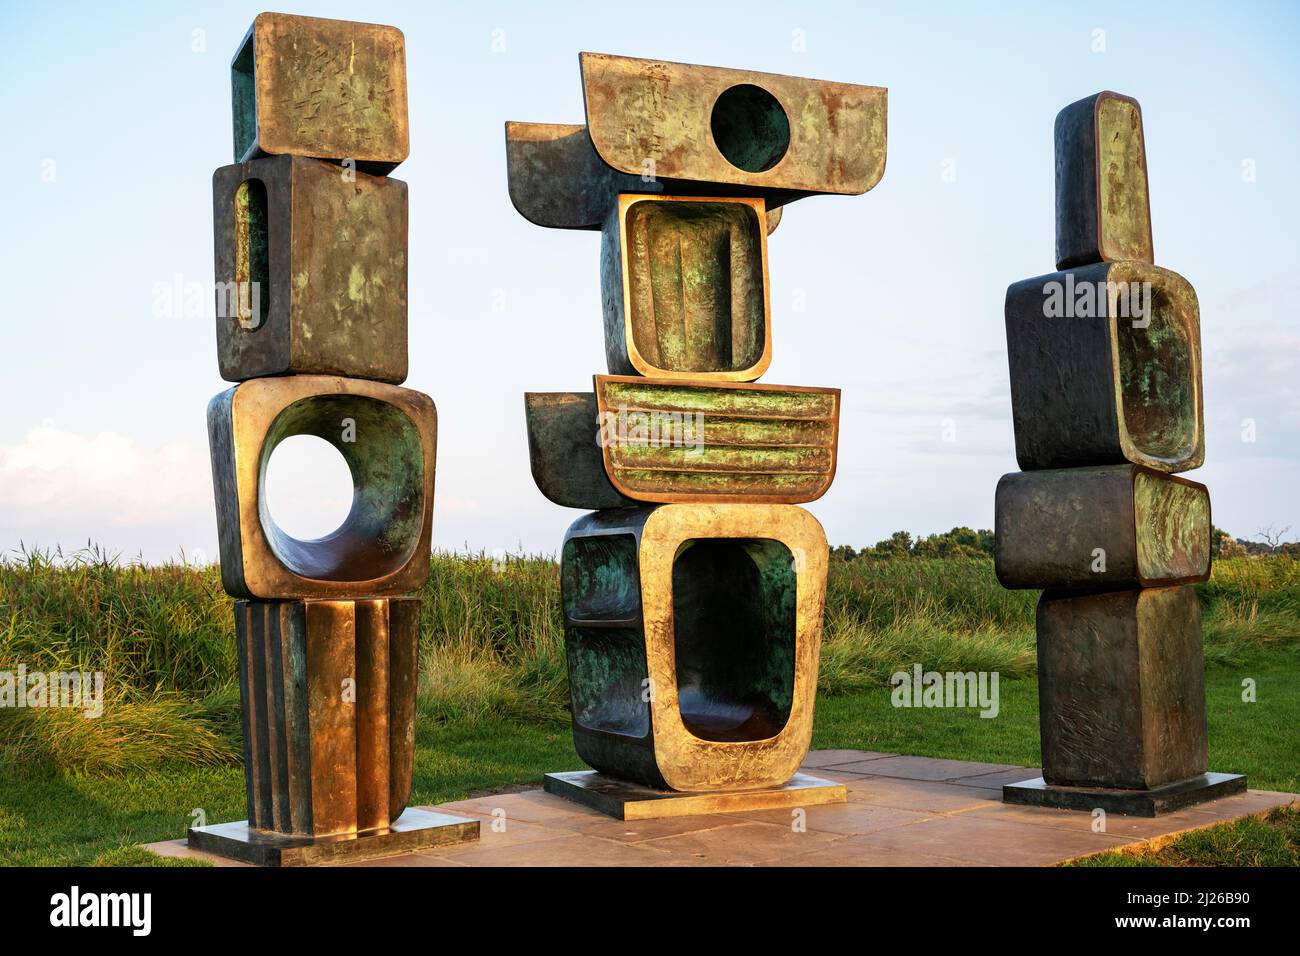 'Family of Man' sculpture by Barbara Hepworth, Snape Maltings, Suffolk, England. Stock Photo